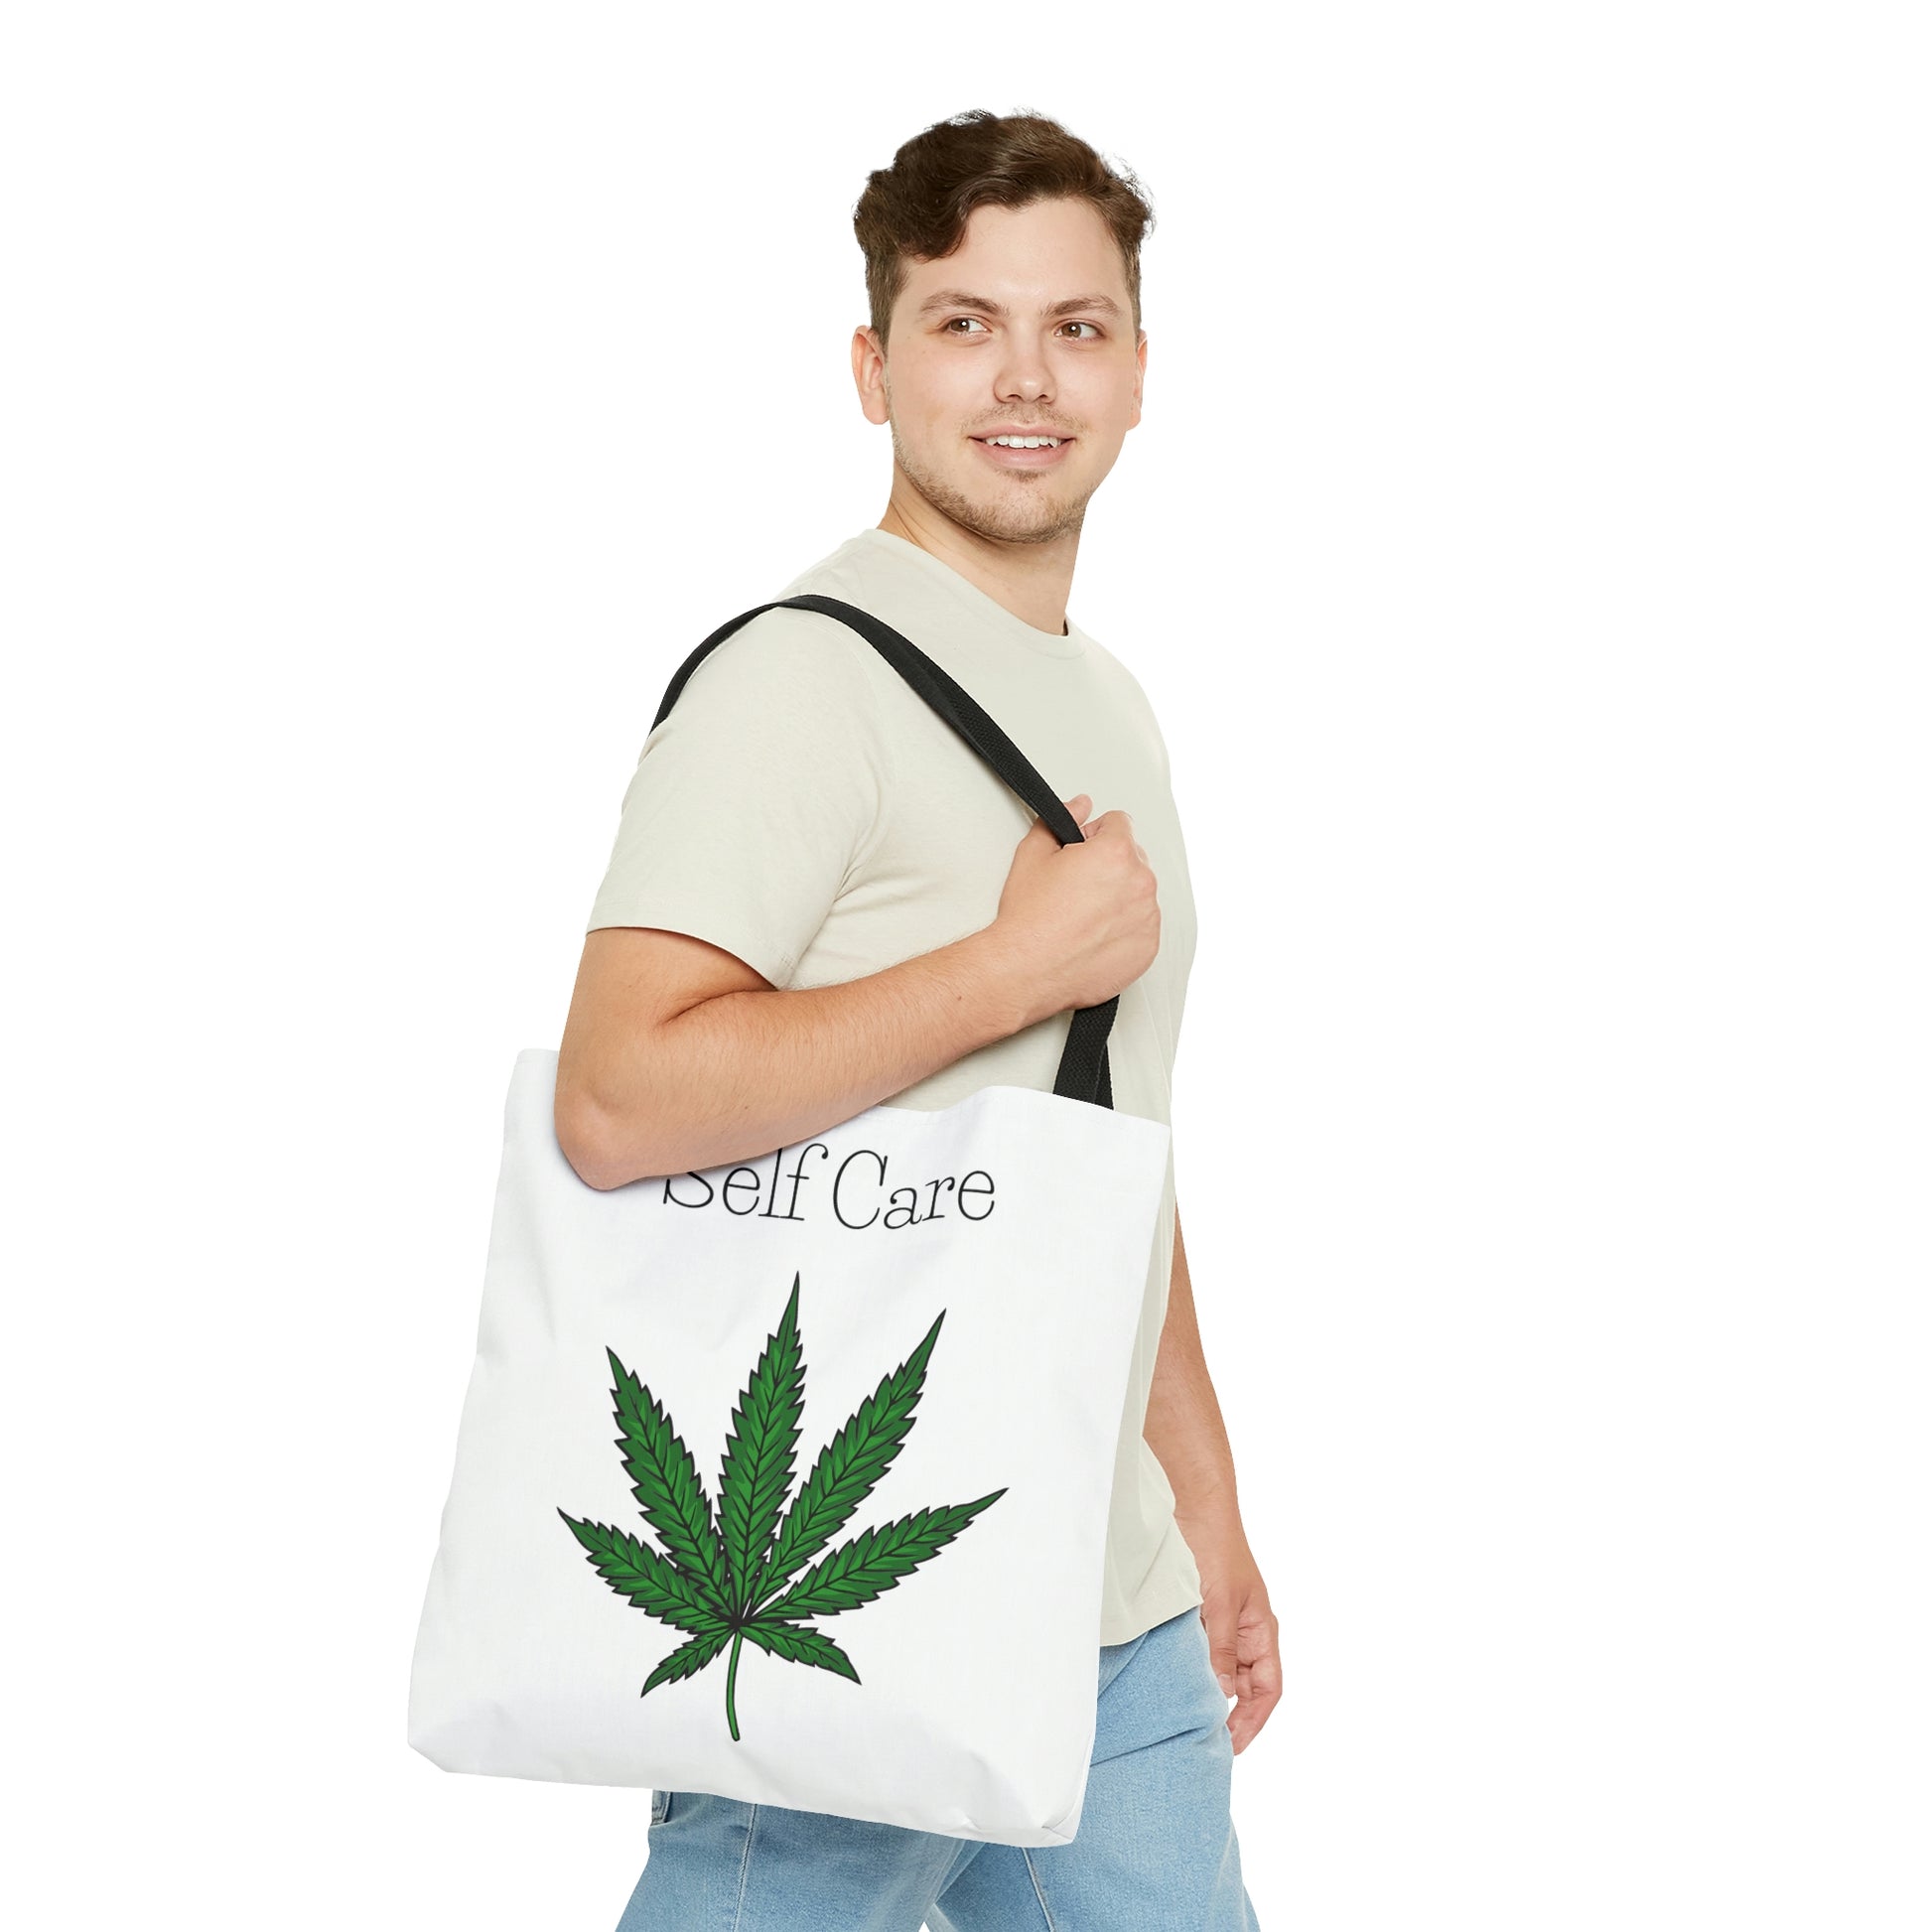 A man in a tan shirt is looking really happy as he wears the Self Care Cannabis Tote Bag with weed leaf